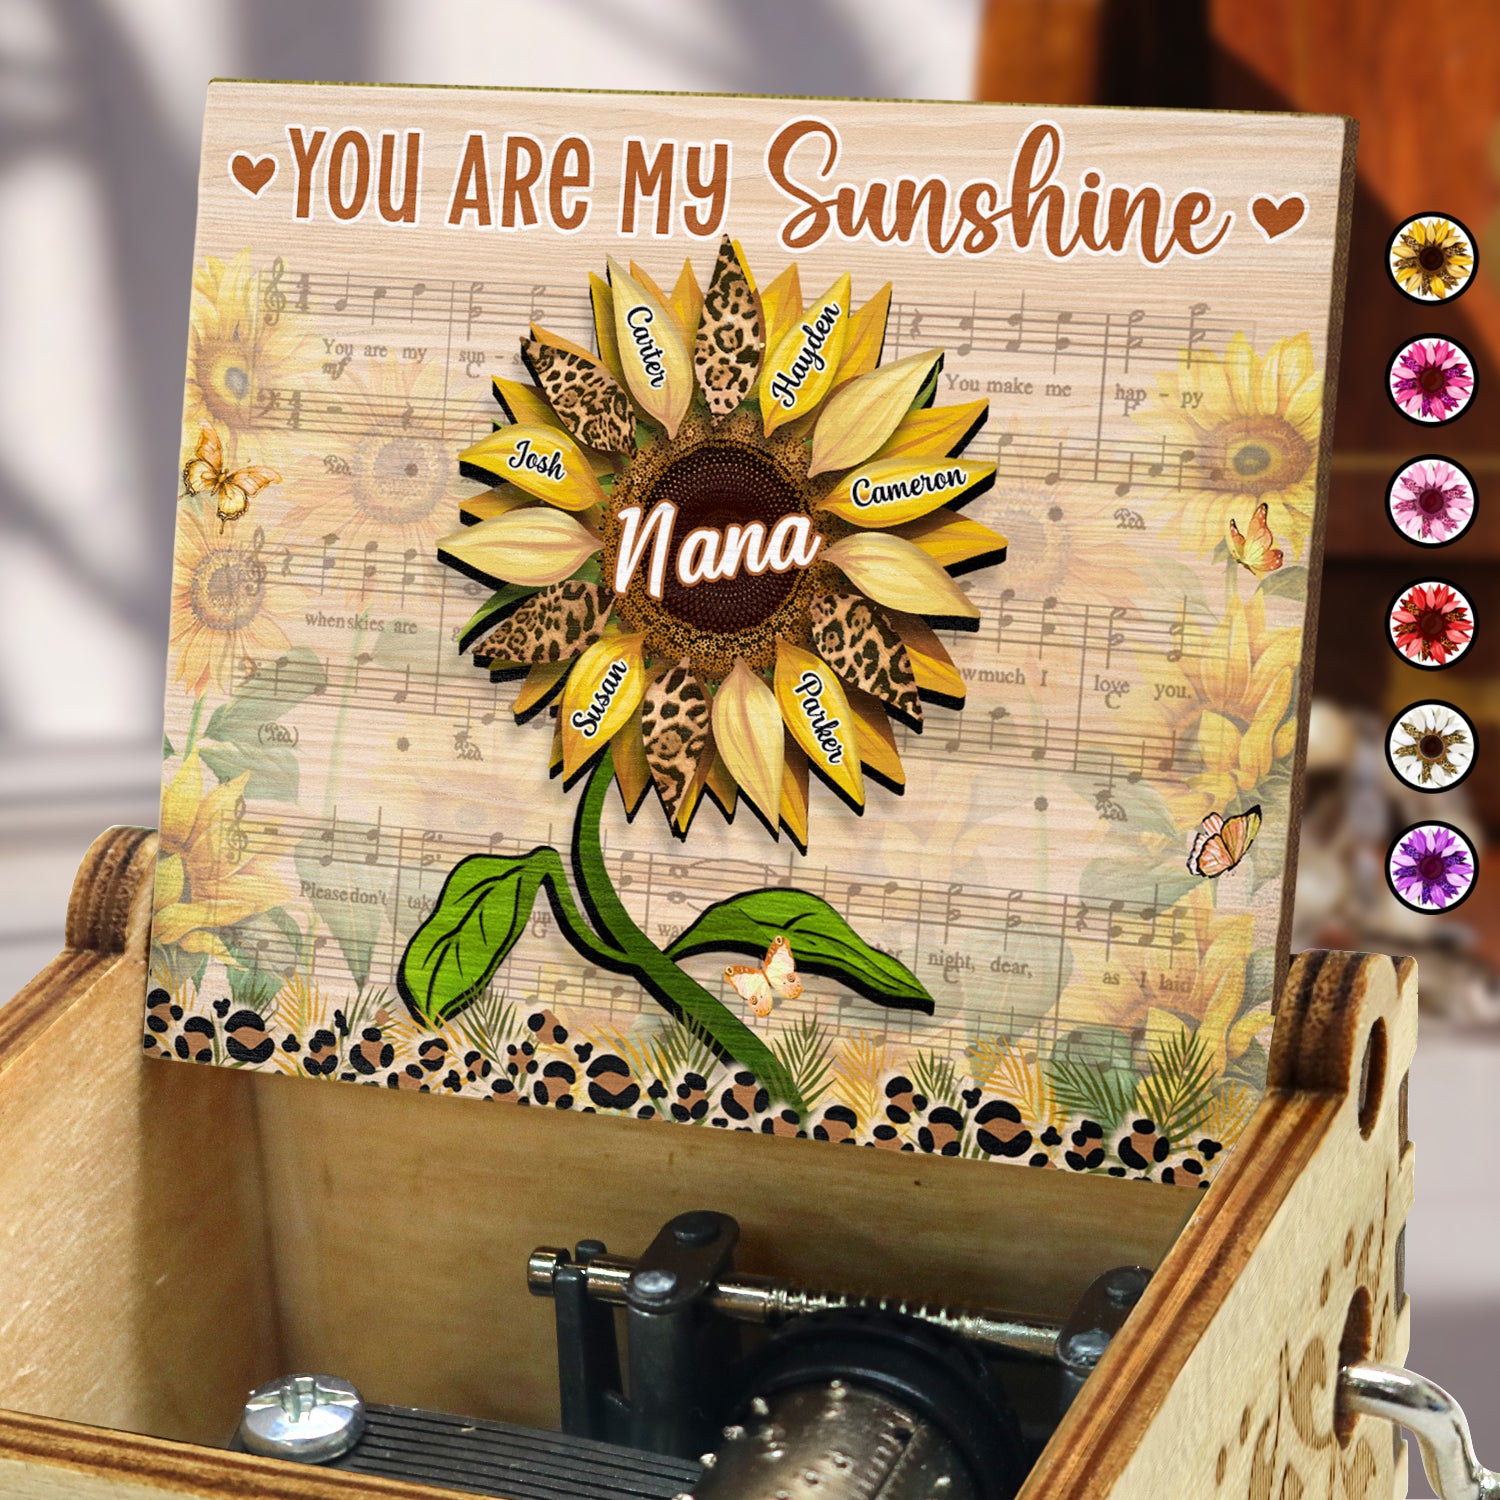 Nana, Mom, Auntie You Are My Sunshine - Birthday, Loving Gift For Mother, Grandma, Grandmother - Personalized Spin Button, Hand Crank Music Box